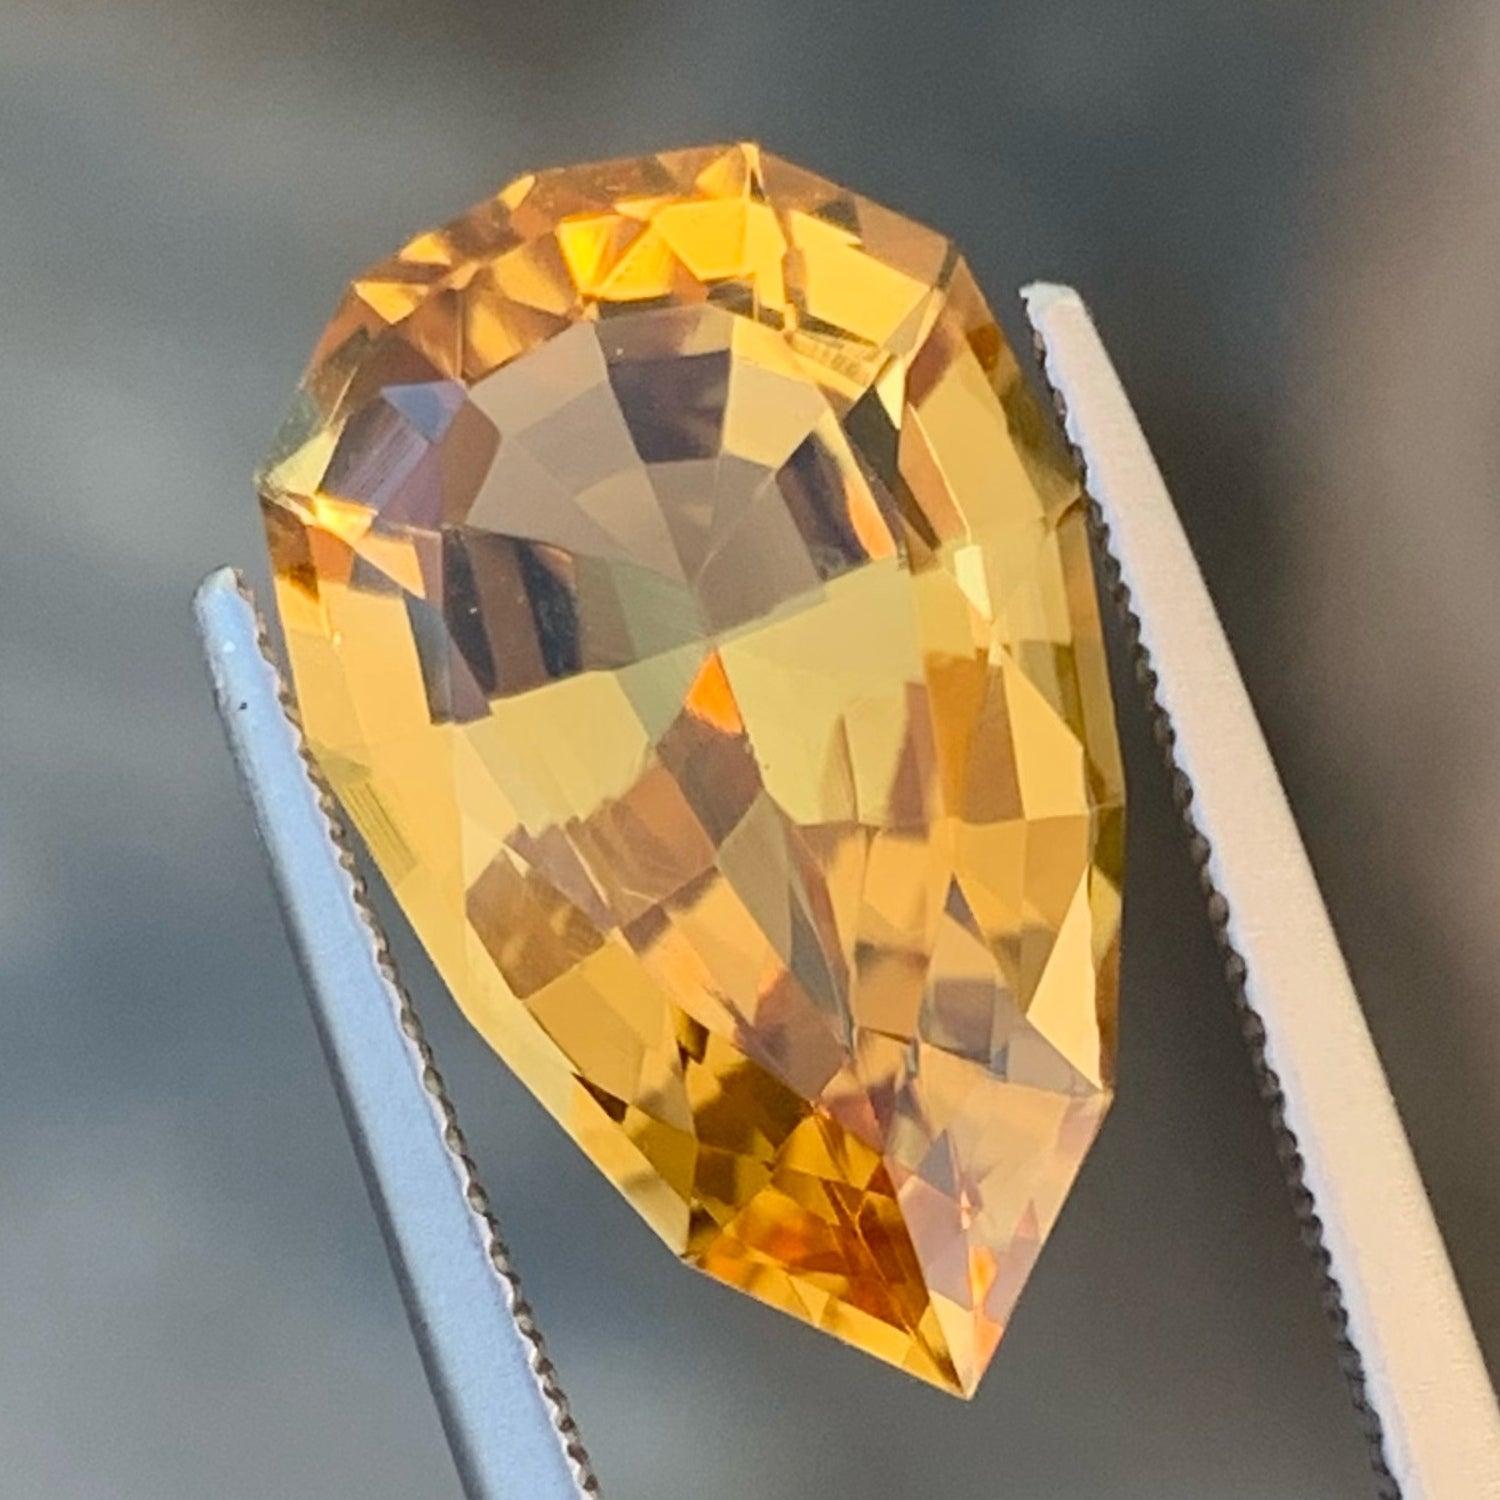 Sparkling Natural Citrine For Pendant, Available for sale at whole sale price natural high quality 7.90 Carats Loupe Clean Clarity Unheated Citrine From Brazil.

Product Information:
GEMSTONE TYPE: Sparkling Natural Citrine For Pendant
WEIGHT: 7.90